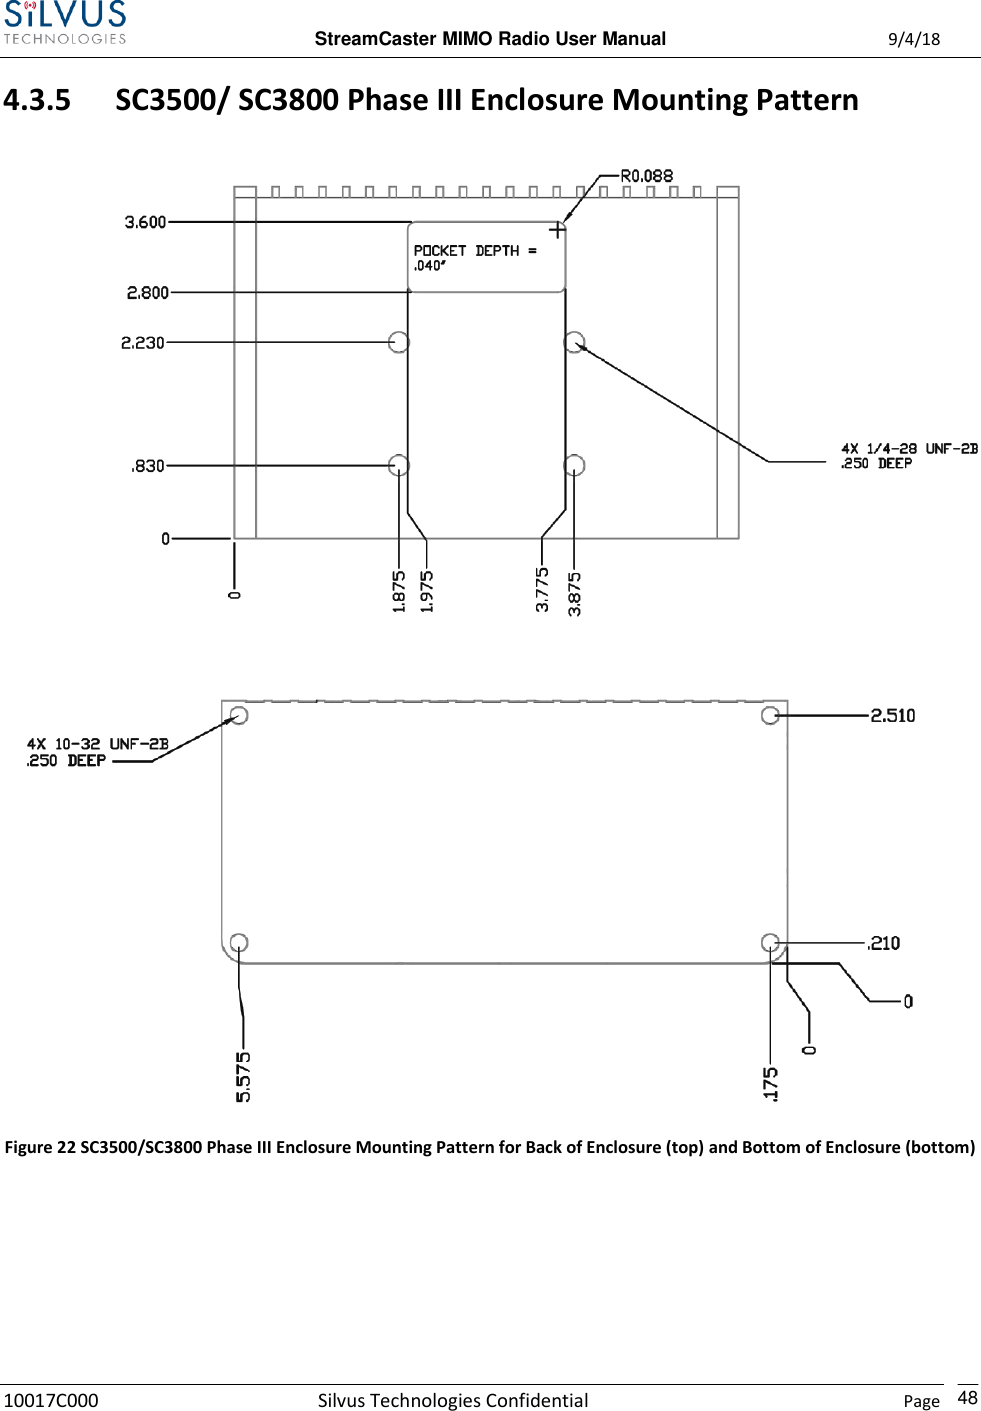  StreamCaster MIMO Radio User Manual  9/4/18 10017C000 Silvus Technologies Confidential    Page    48 4.3.5 SC3500/ SC3800 Phase III Enclosure Mounting Pattern   Figure 22 SC3500/SC3800 Phase III Enclosure Mounting Pattern for Back of Enclosure (top) and Bottom of Enclosure (bottom)   